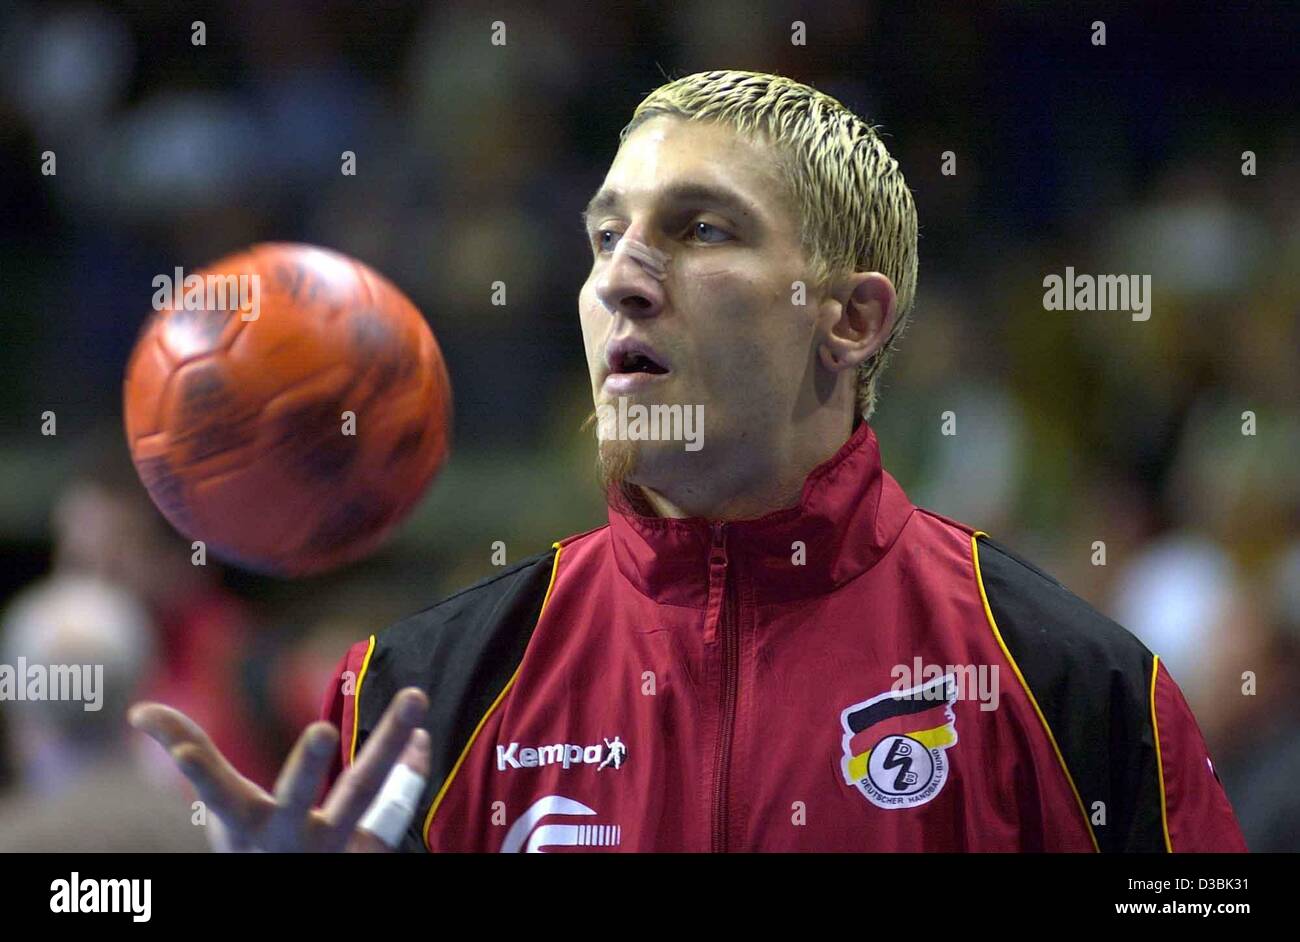 (dpa) - German handballer on the national team Stefan Kretzschmarspins a ball in his hand ready to play during the handball game Germany against Iceland in Berlin, Germany, 22 March 2003. Germany won 39-34. Kretzschmar managed to contribute five goals to the win. Stock Photo